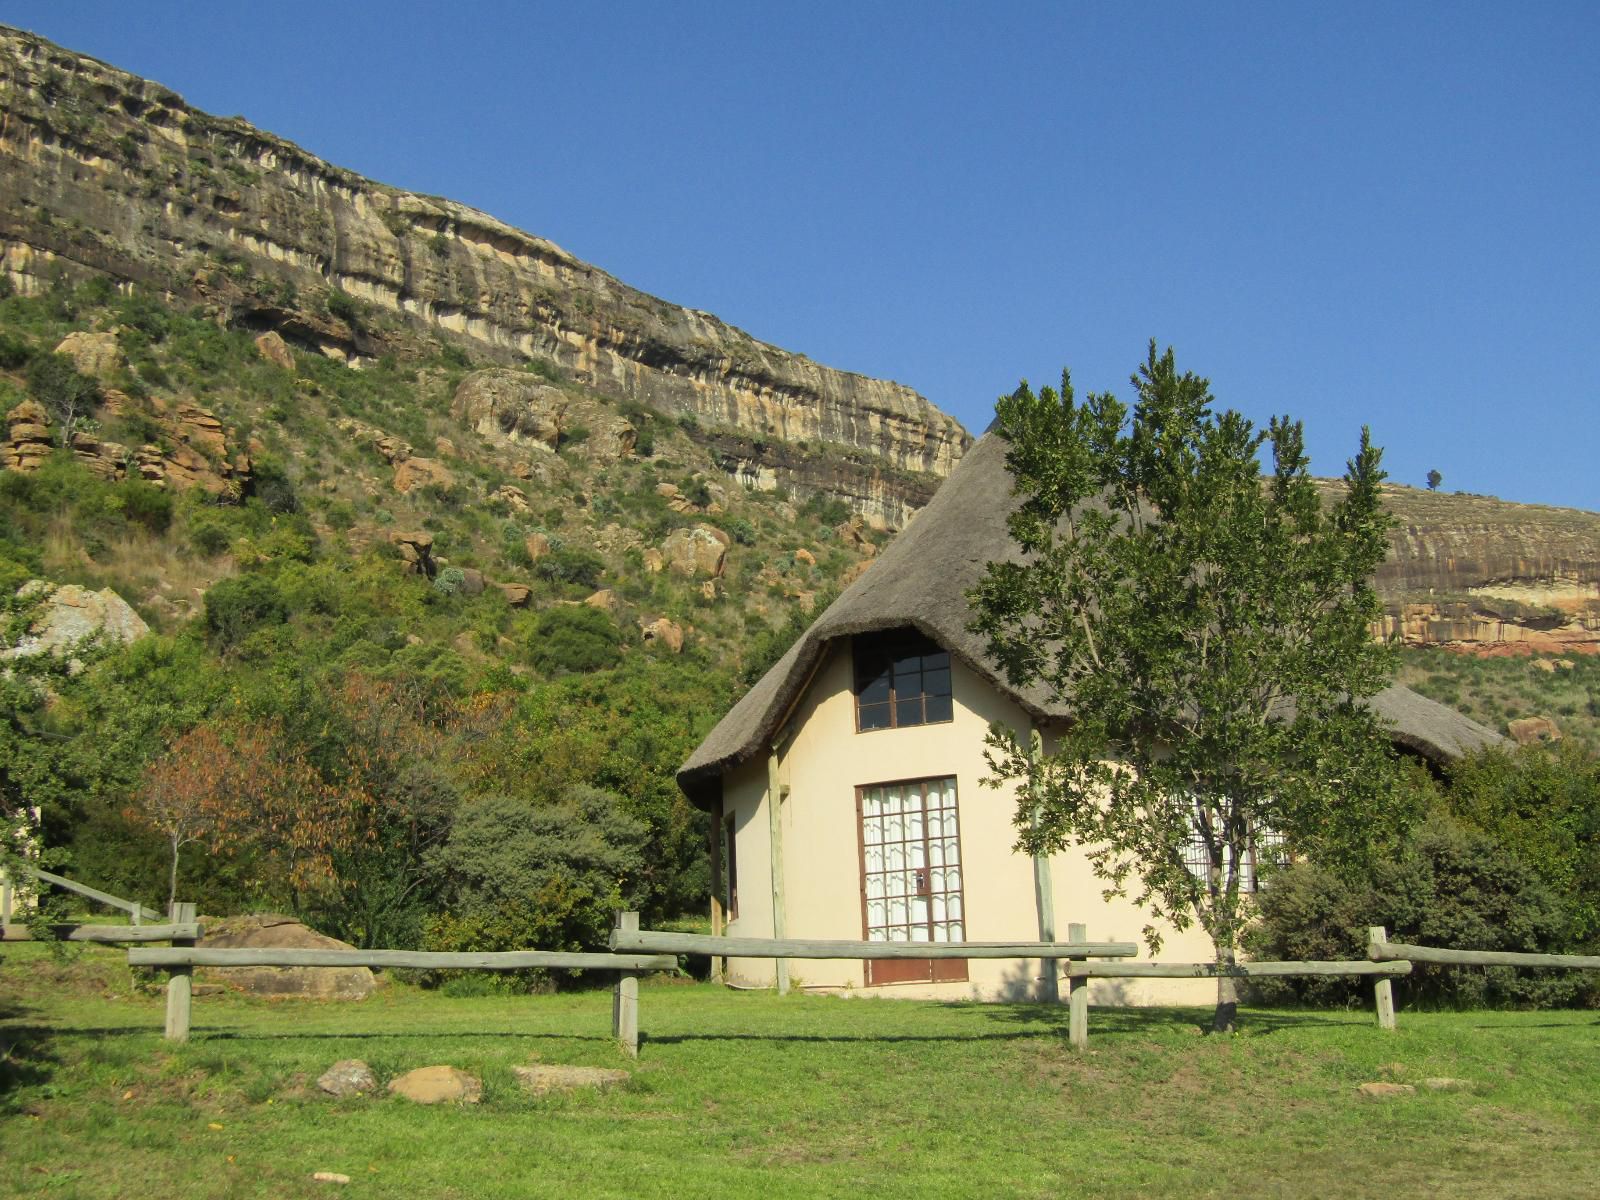 Mafube Mountain Retreat Fouriesburg Free State South Africa Complementary Colors, Building, Architecture, House, Highland, Nature